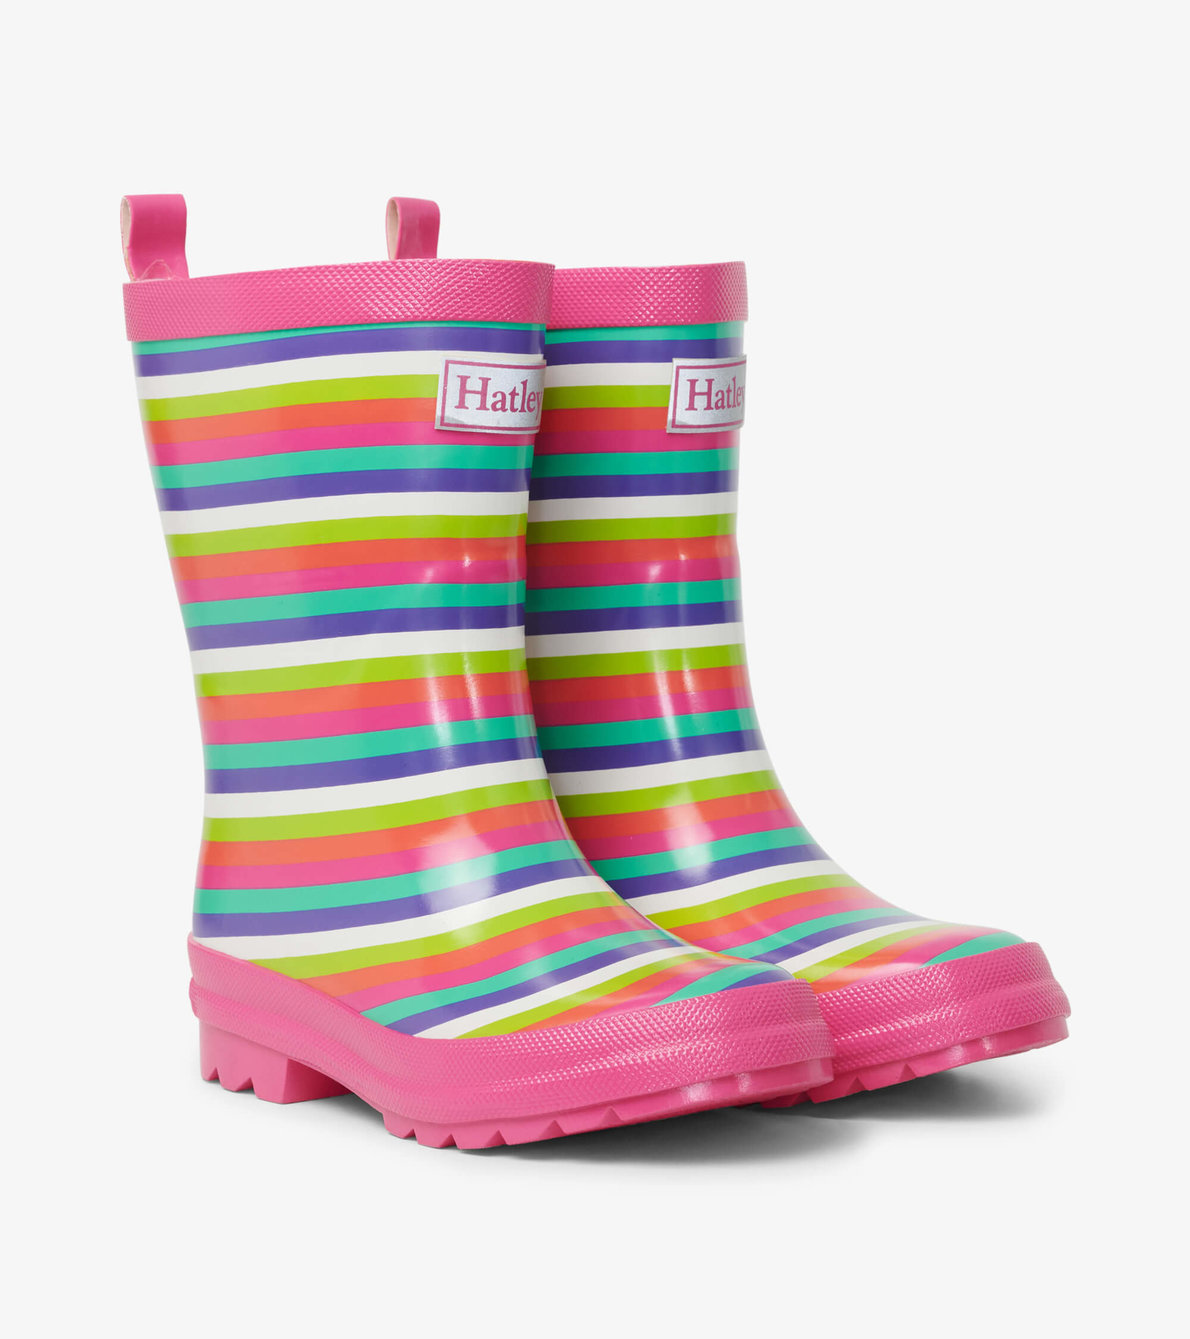 View larger image of Rainbow Stripes Shiny Wellies